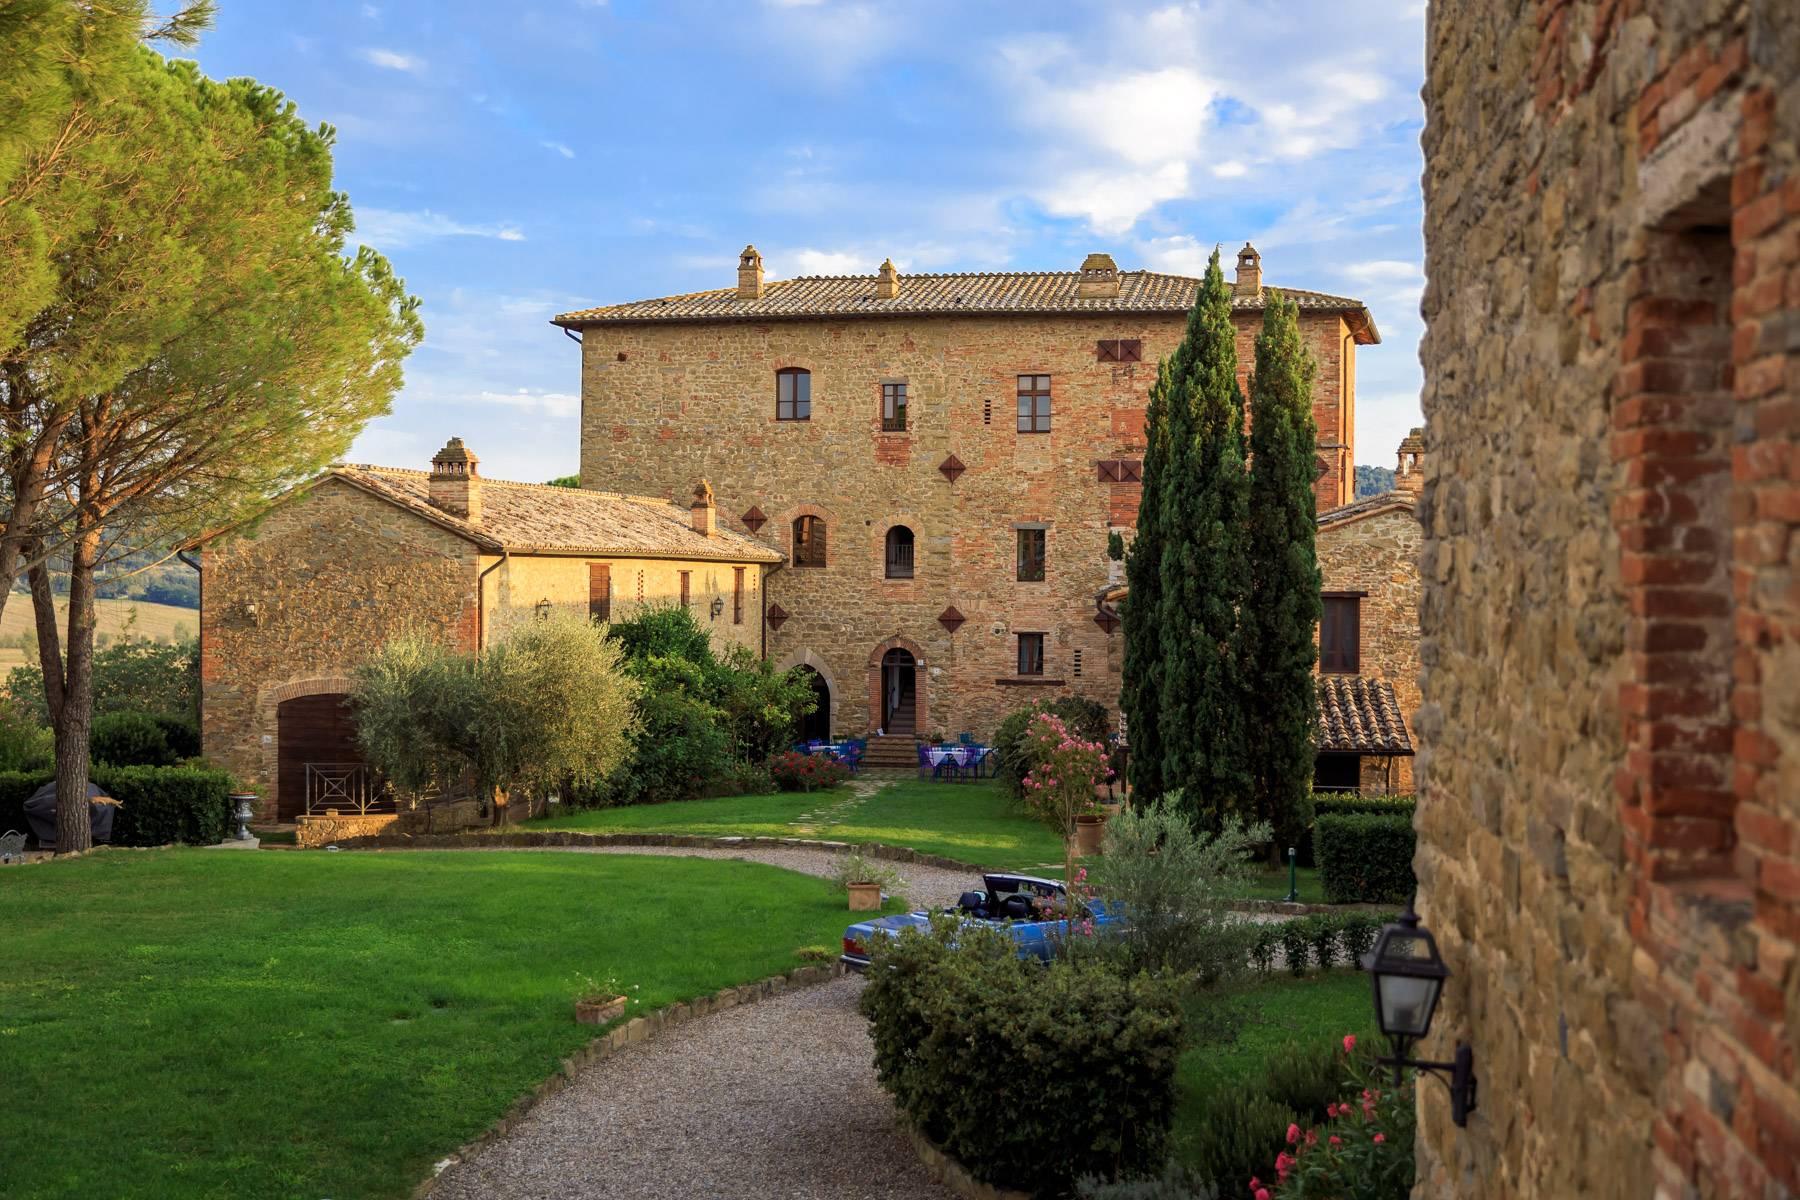 Magnificent castle in the heart of Umbria - 8